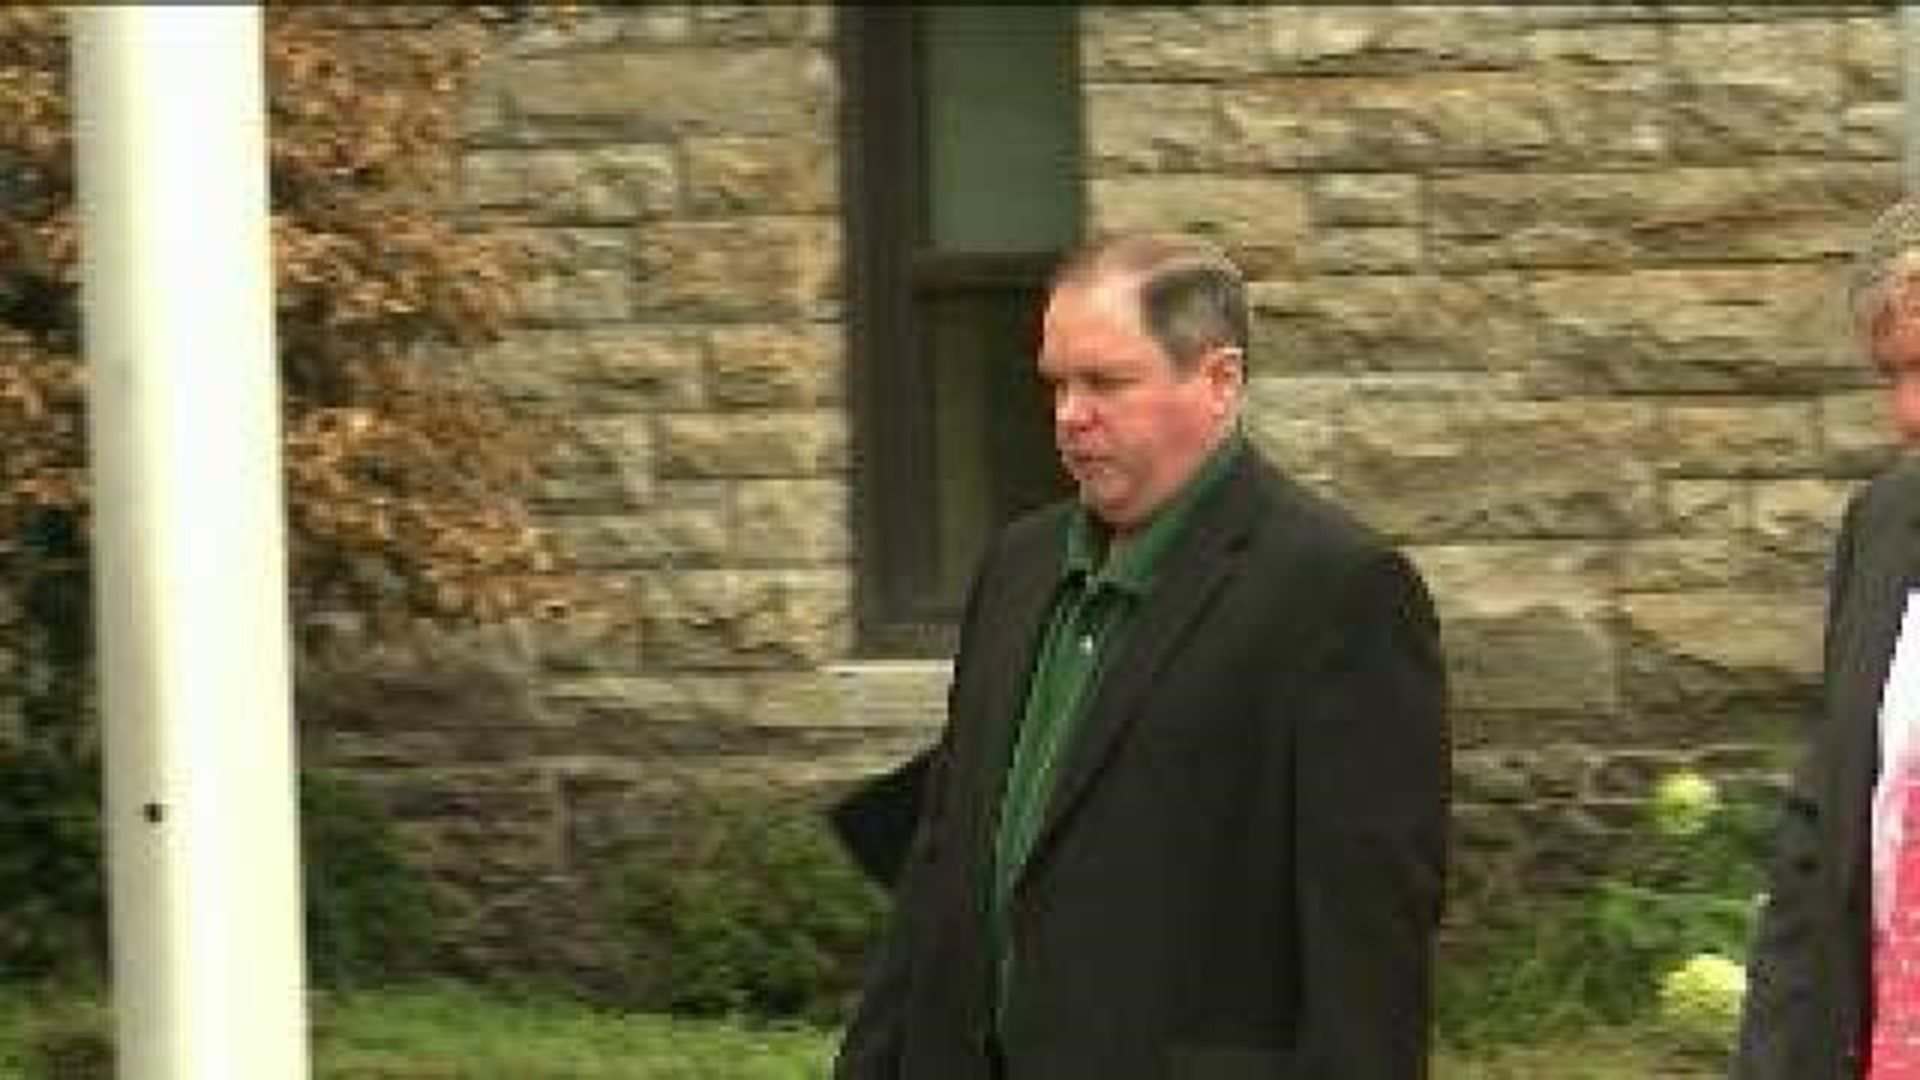 Charges Against Priest Dismissed